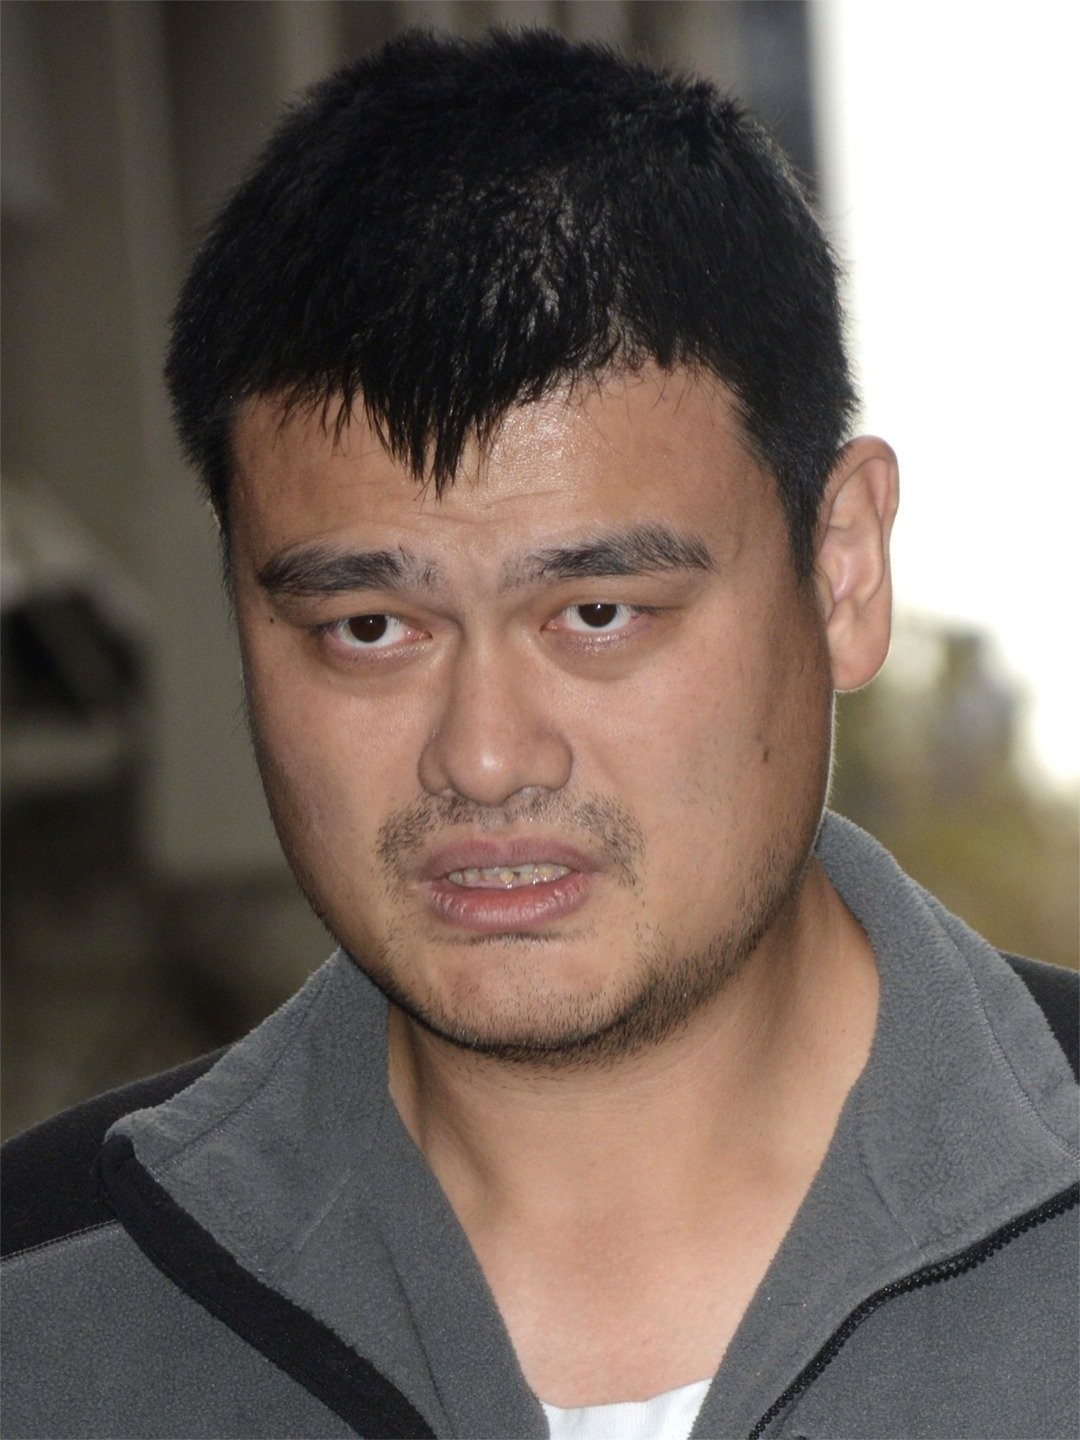 yao ming next to normal person